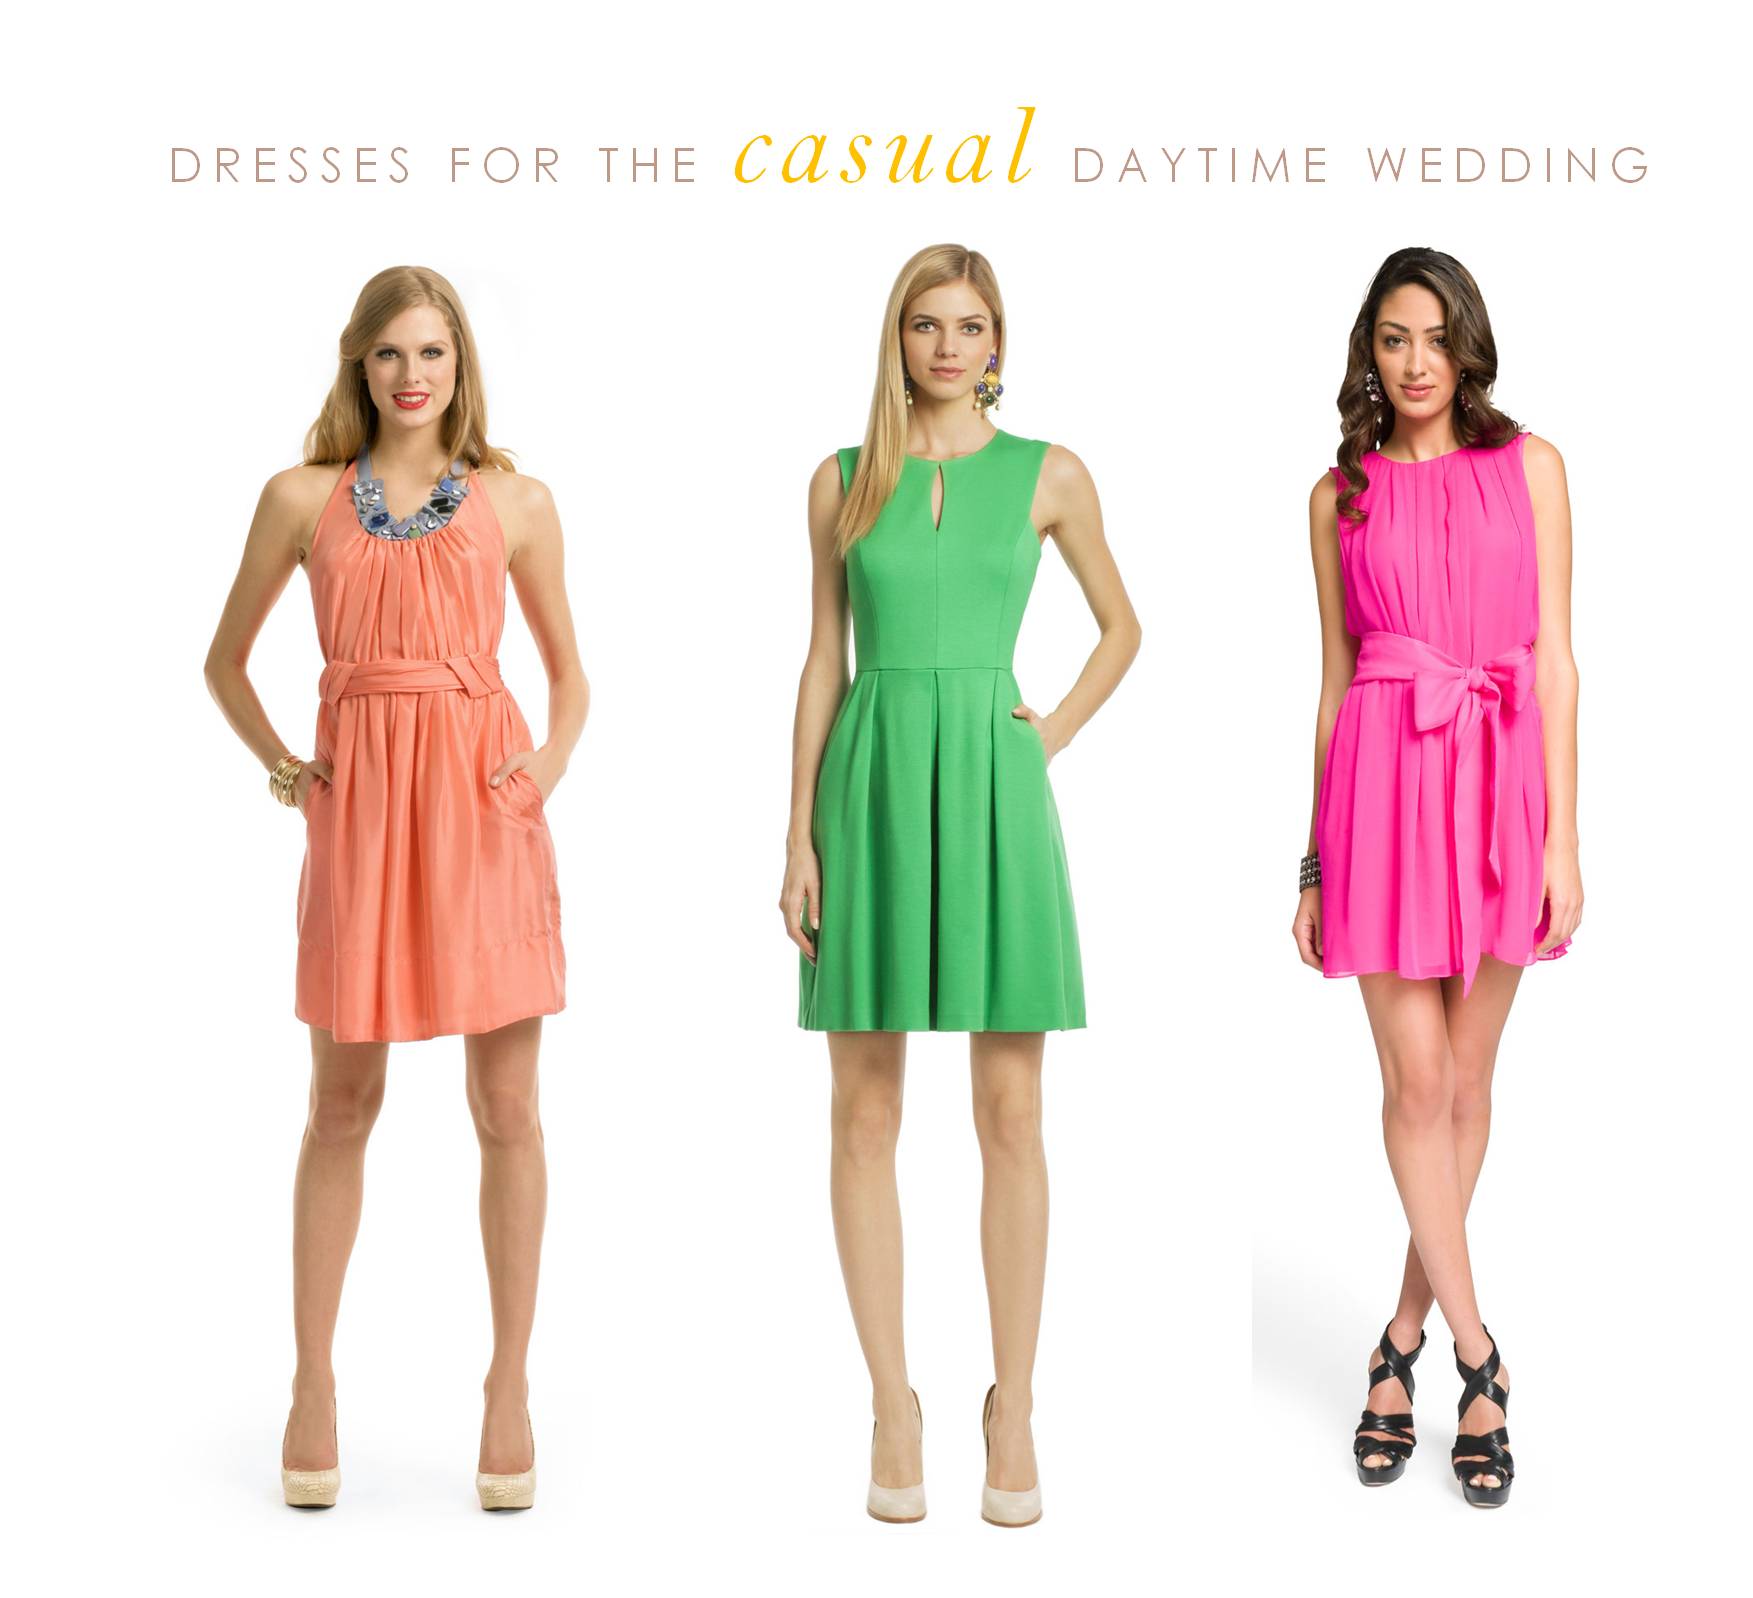 Casual Daytime Dresses